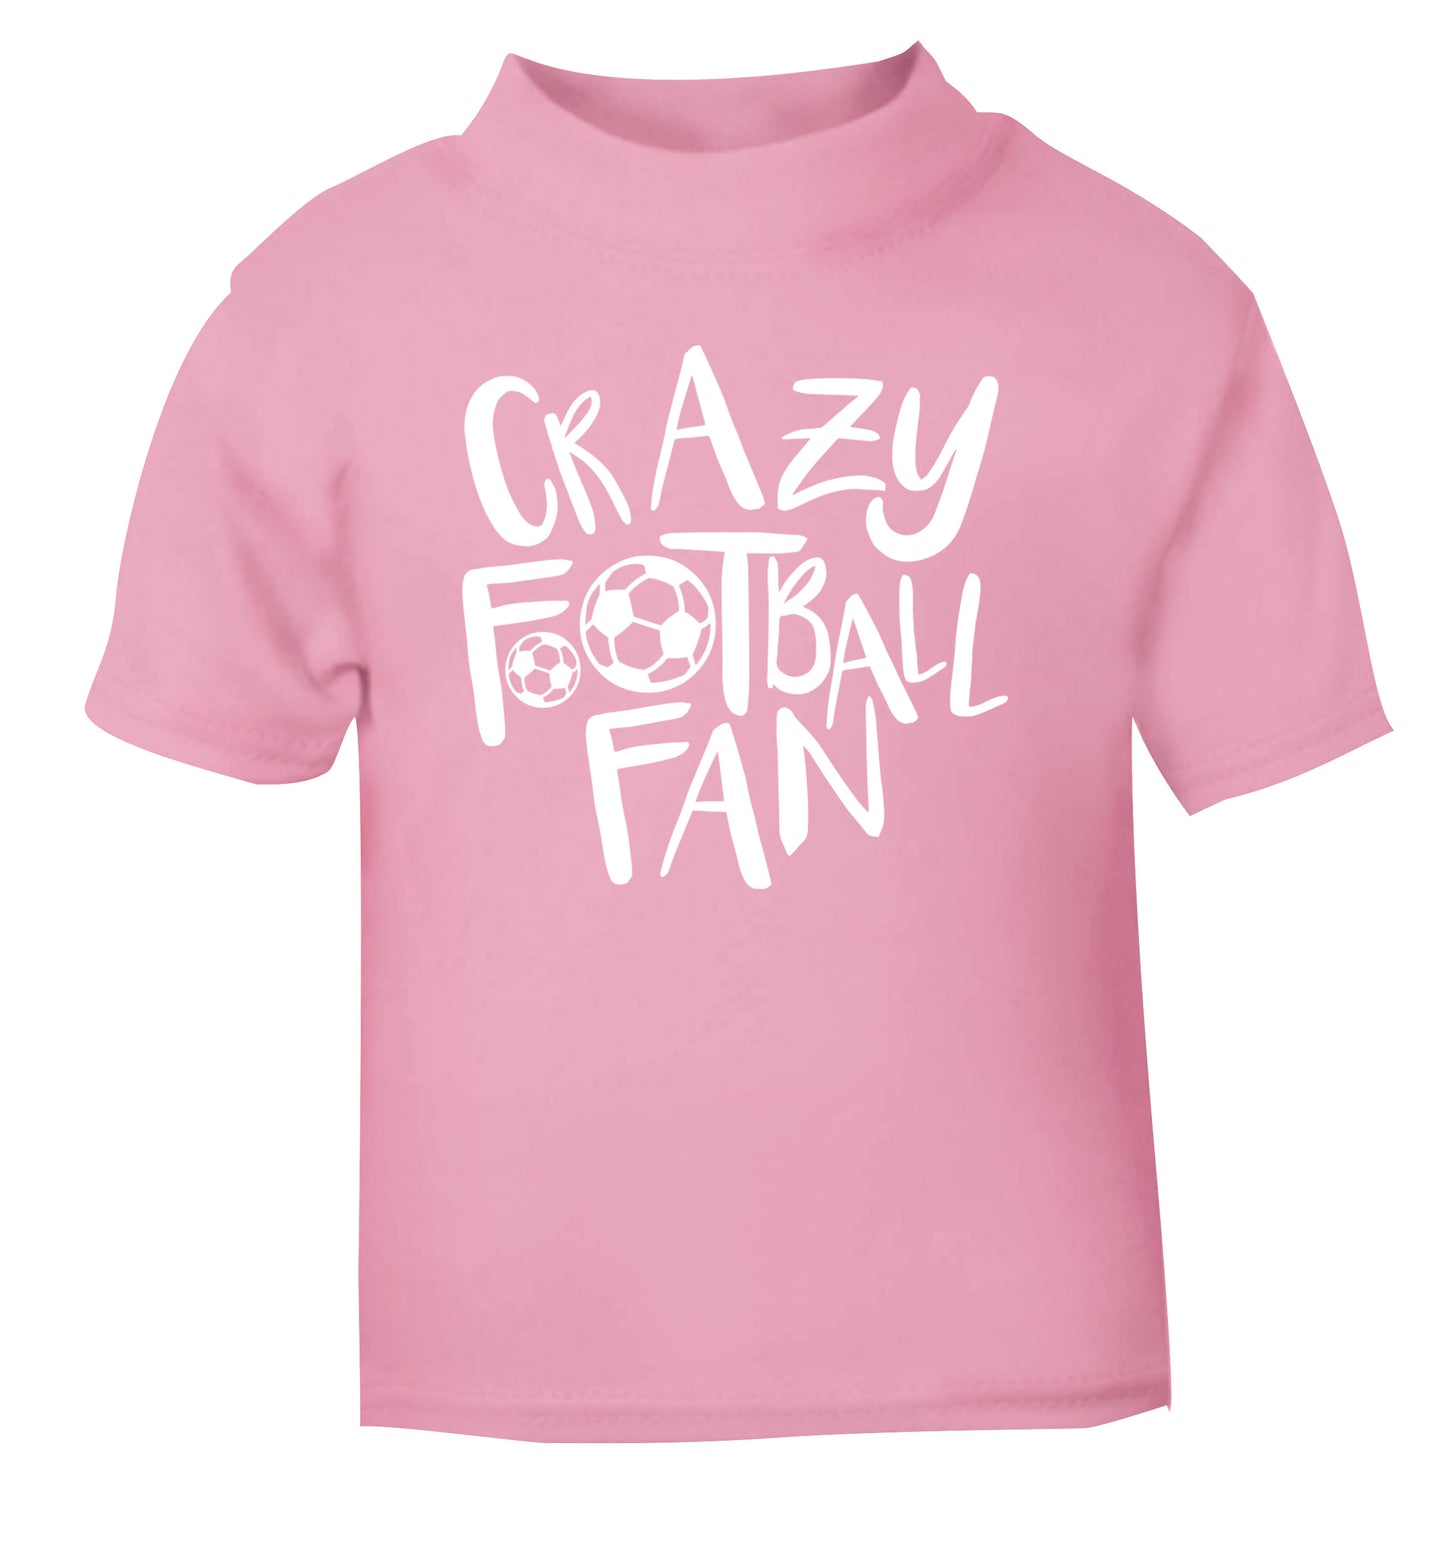 Crazy football fan light pink Baby Toddler Tshirt 2 Years